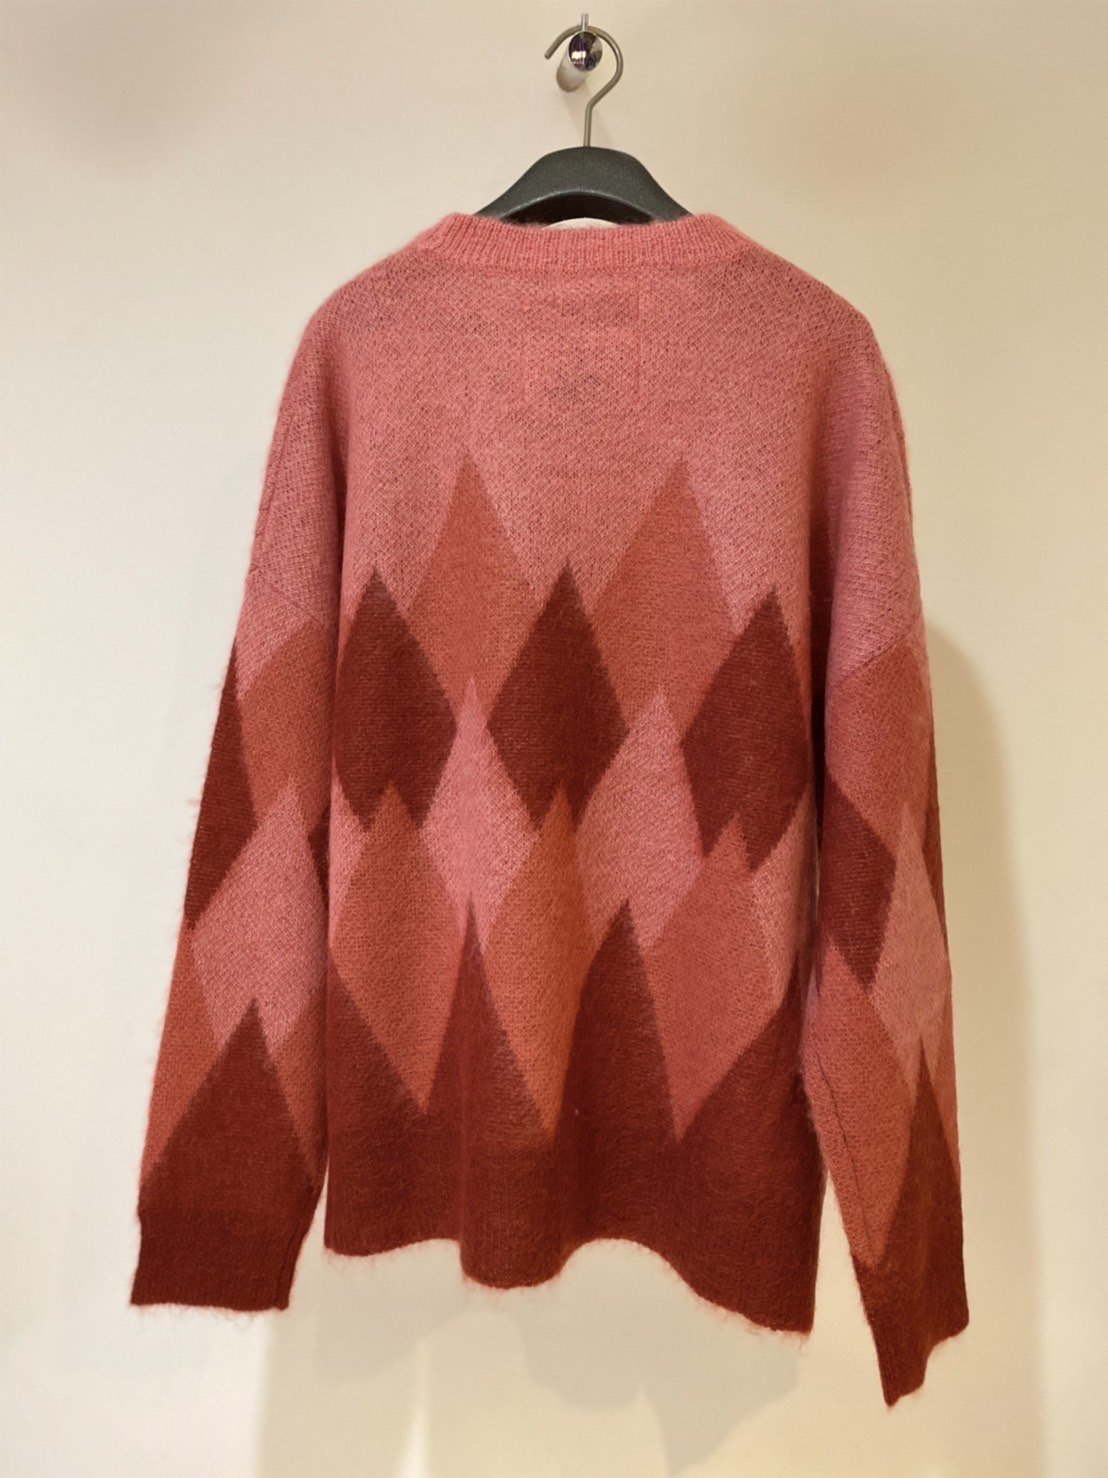 DAIRIKU<br />Argyle Mohair Pullover Knit / Pink Red<img class='new_mark_img2' src='https://img.shop-pro.jp/img/new/icons14.gif' style='border:none;display:inline;margin:0px;padding:0px;width:auto;' />